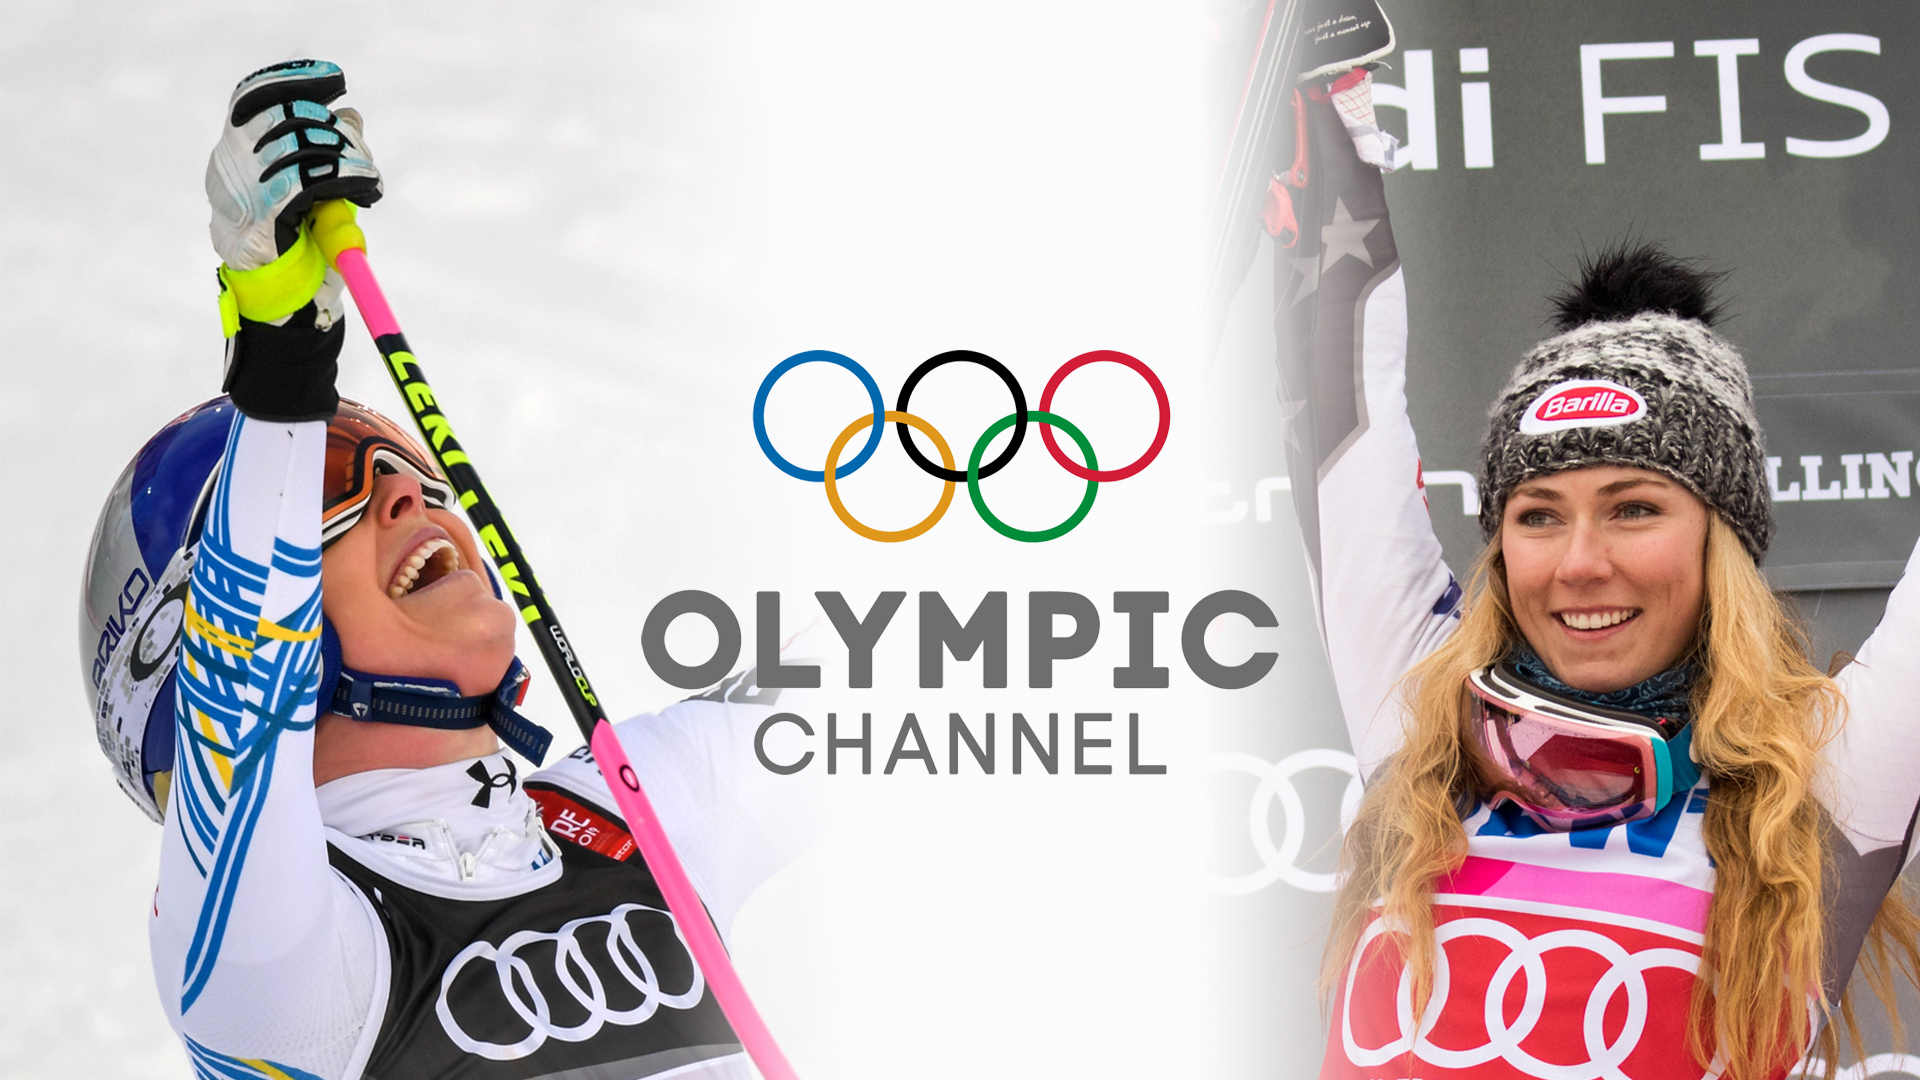 Olympic Channel To Showcase Vonn, Shiffrin With 40 Hours of Featured